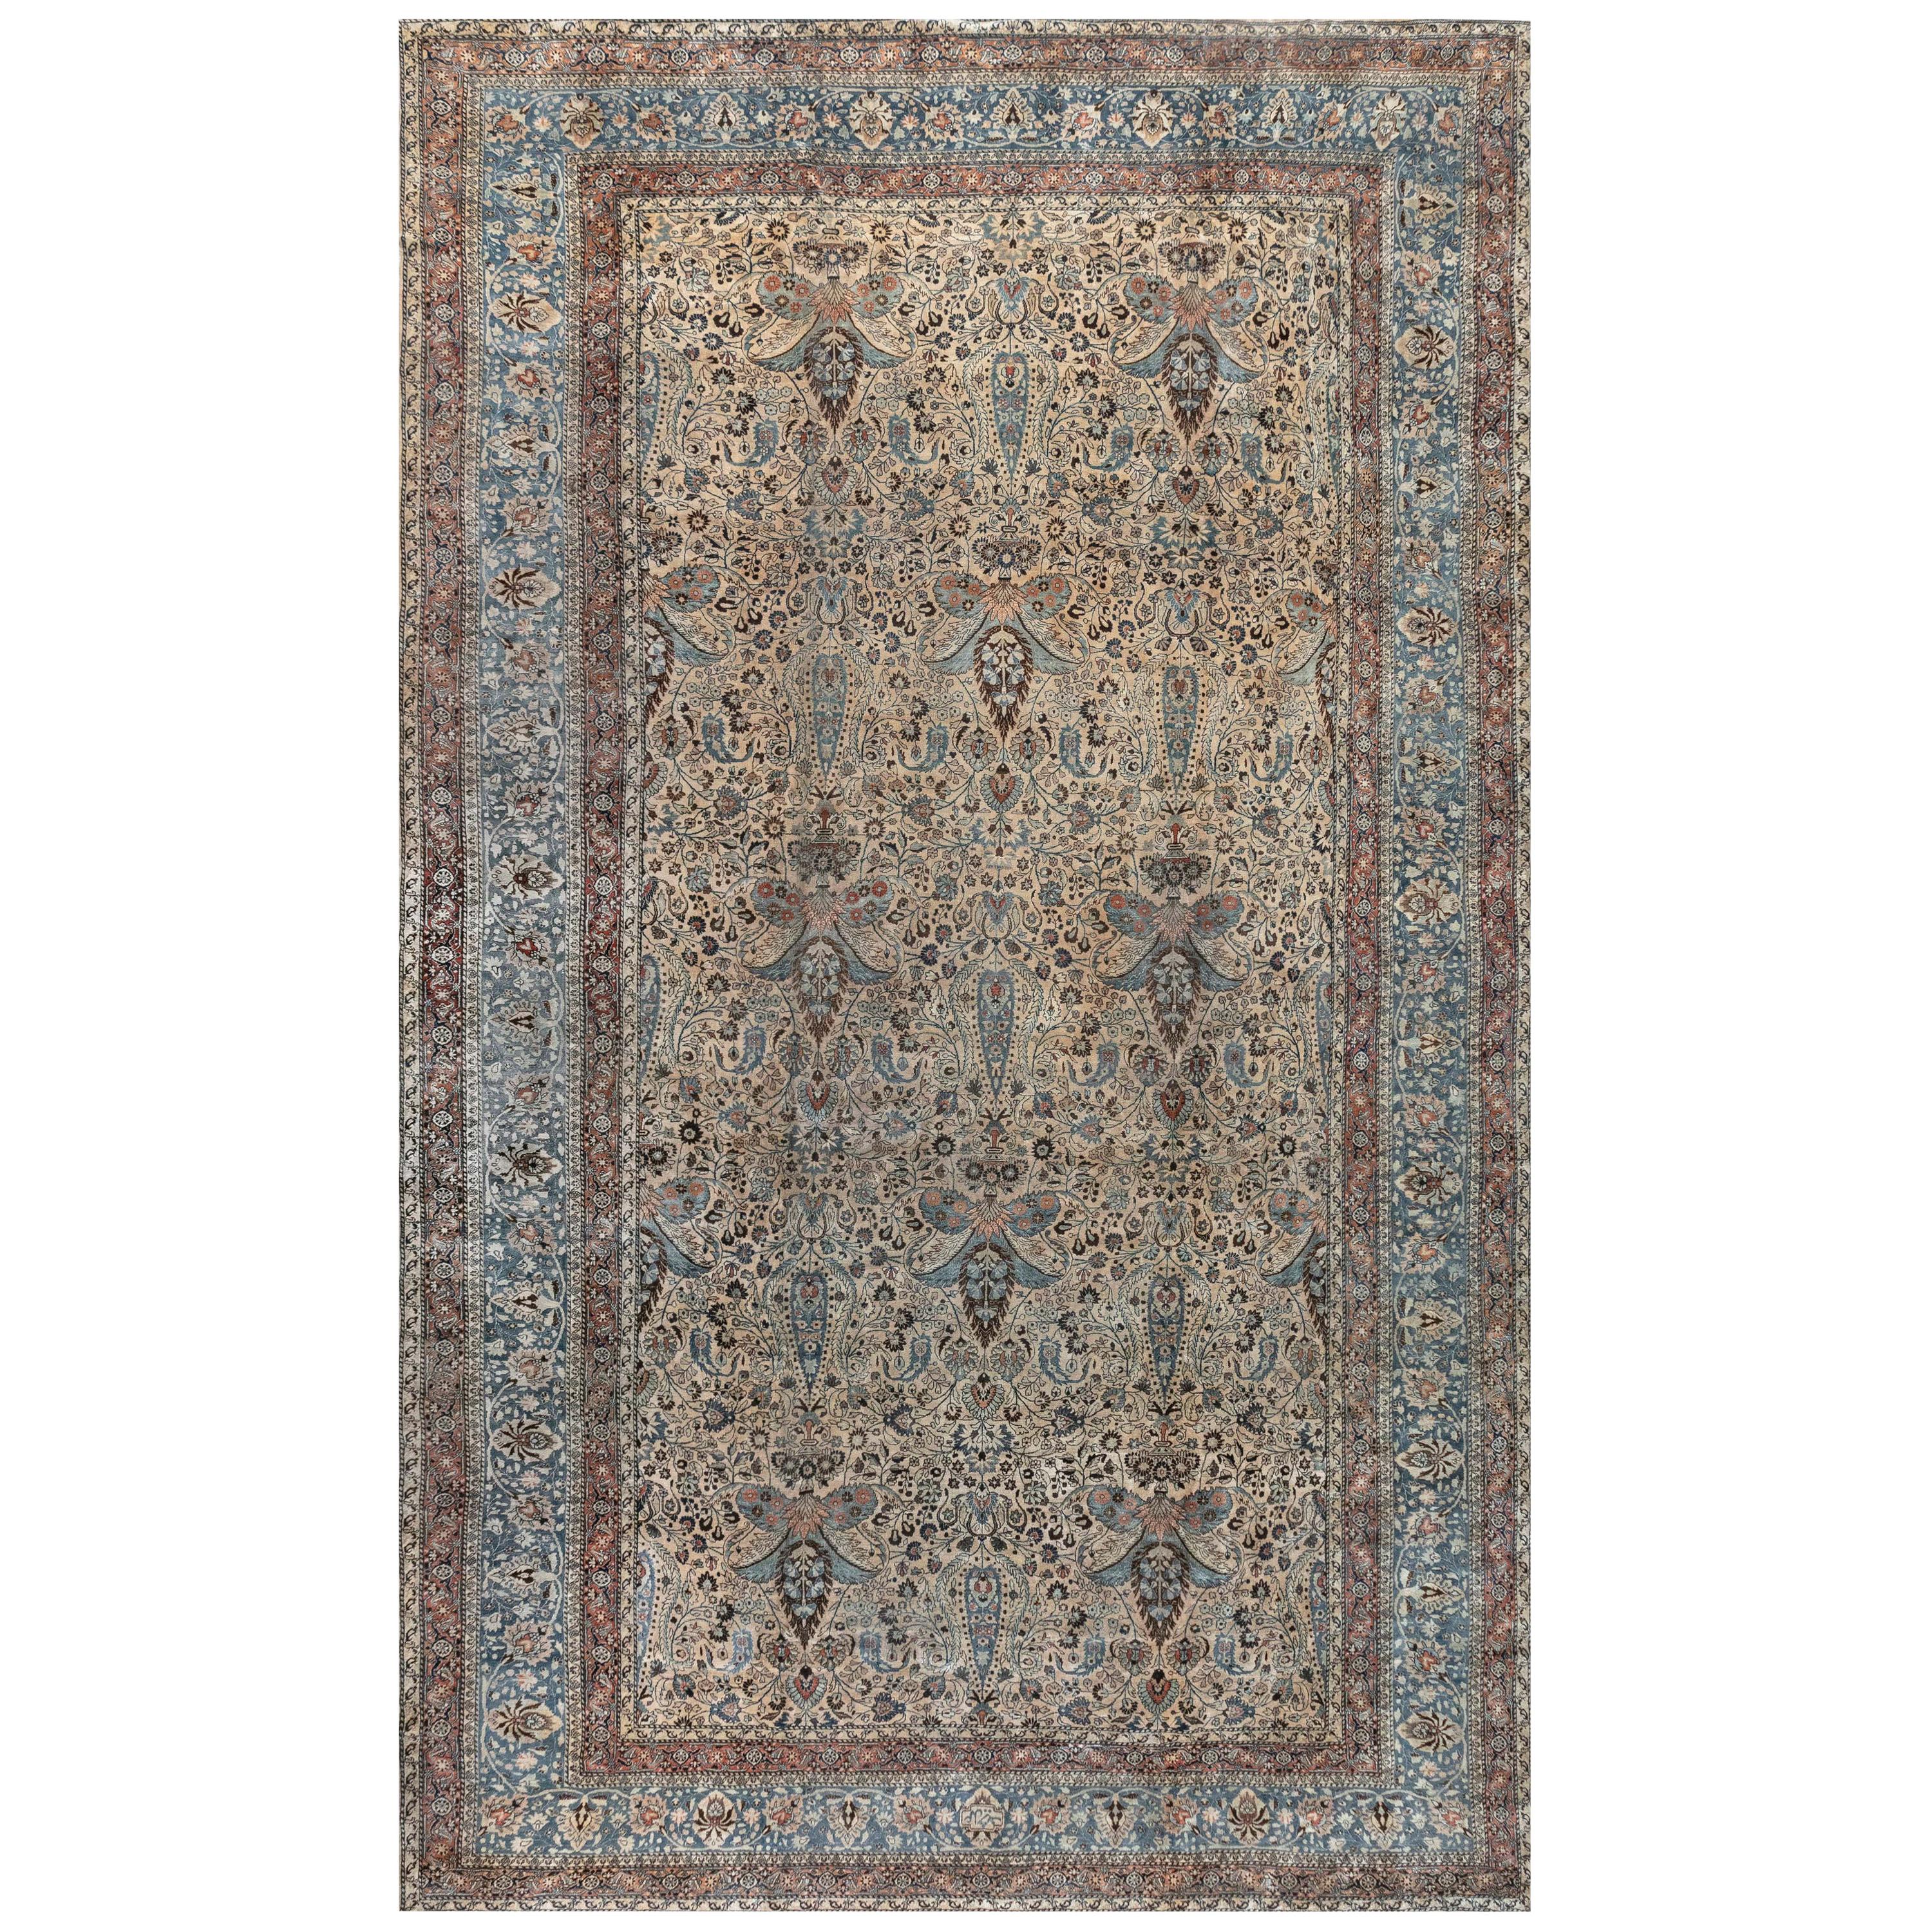 Authentic 1900s Persian Khorassan Rug For Sale